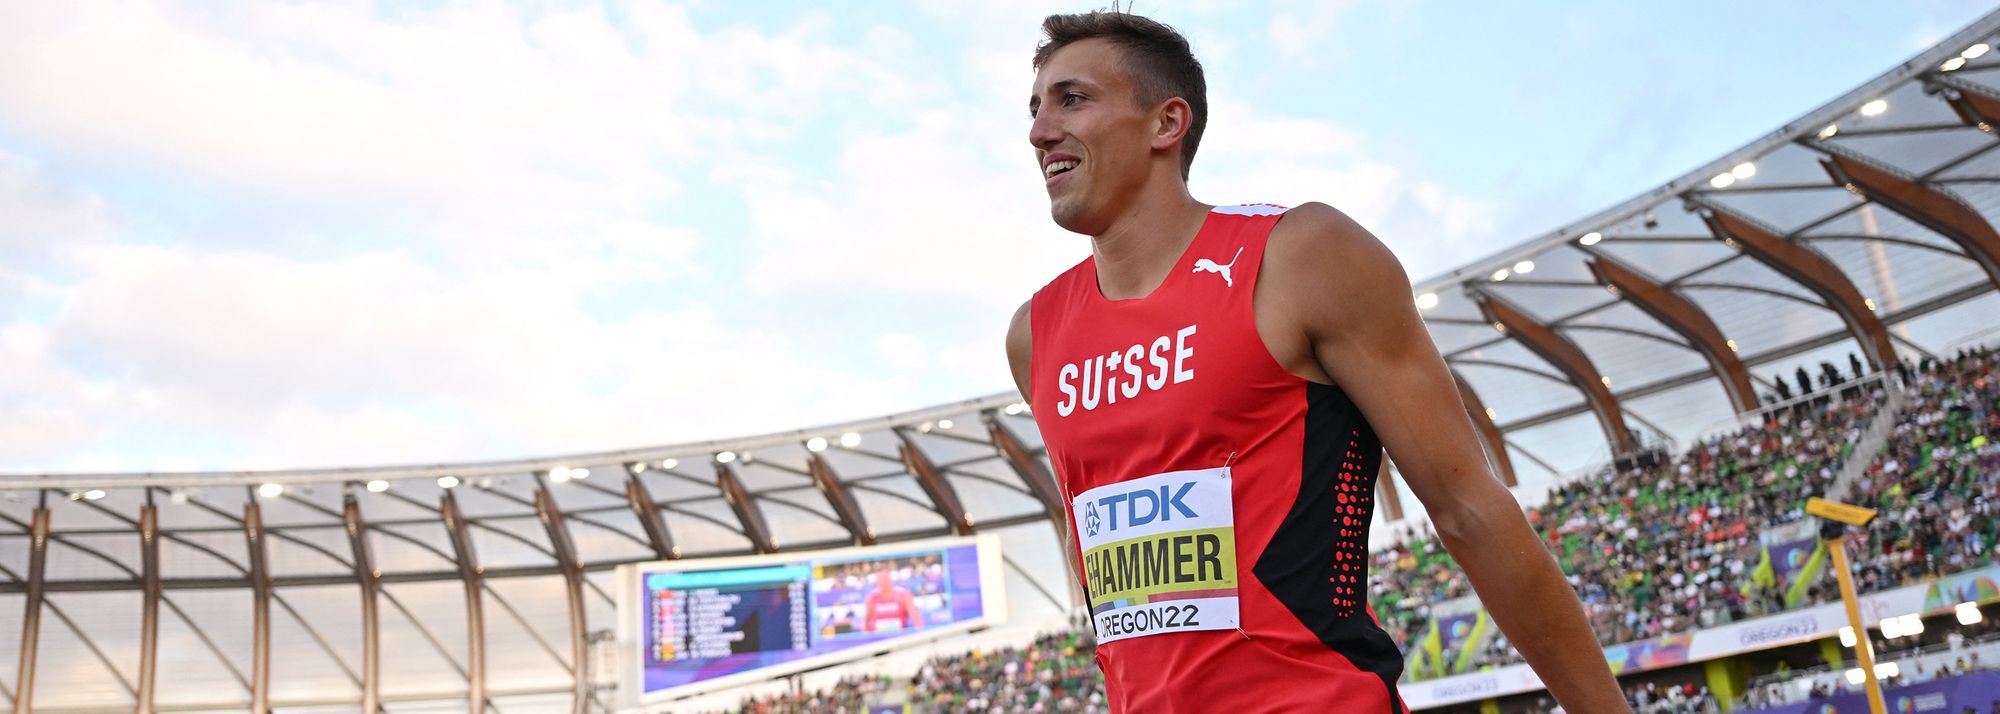 On his way to world indoor heptathlon silver, Simon Ehammer looked longingly at the long jump competition taking place a few metres away